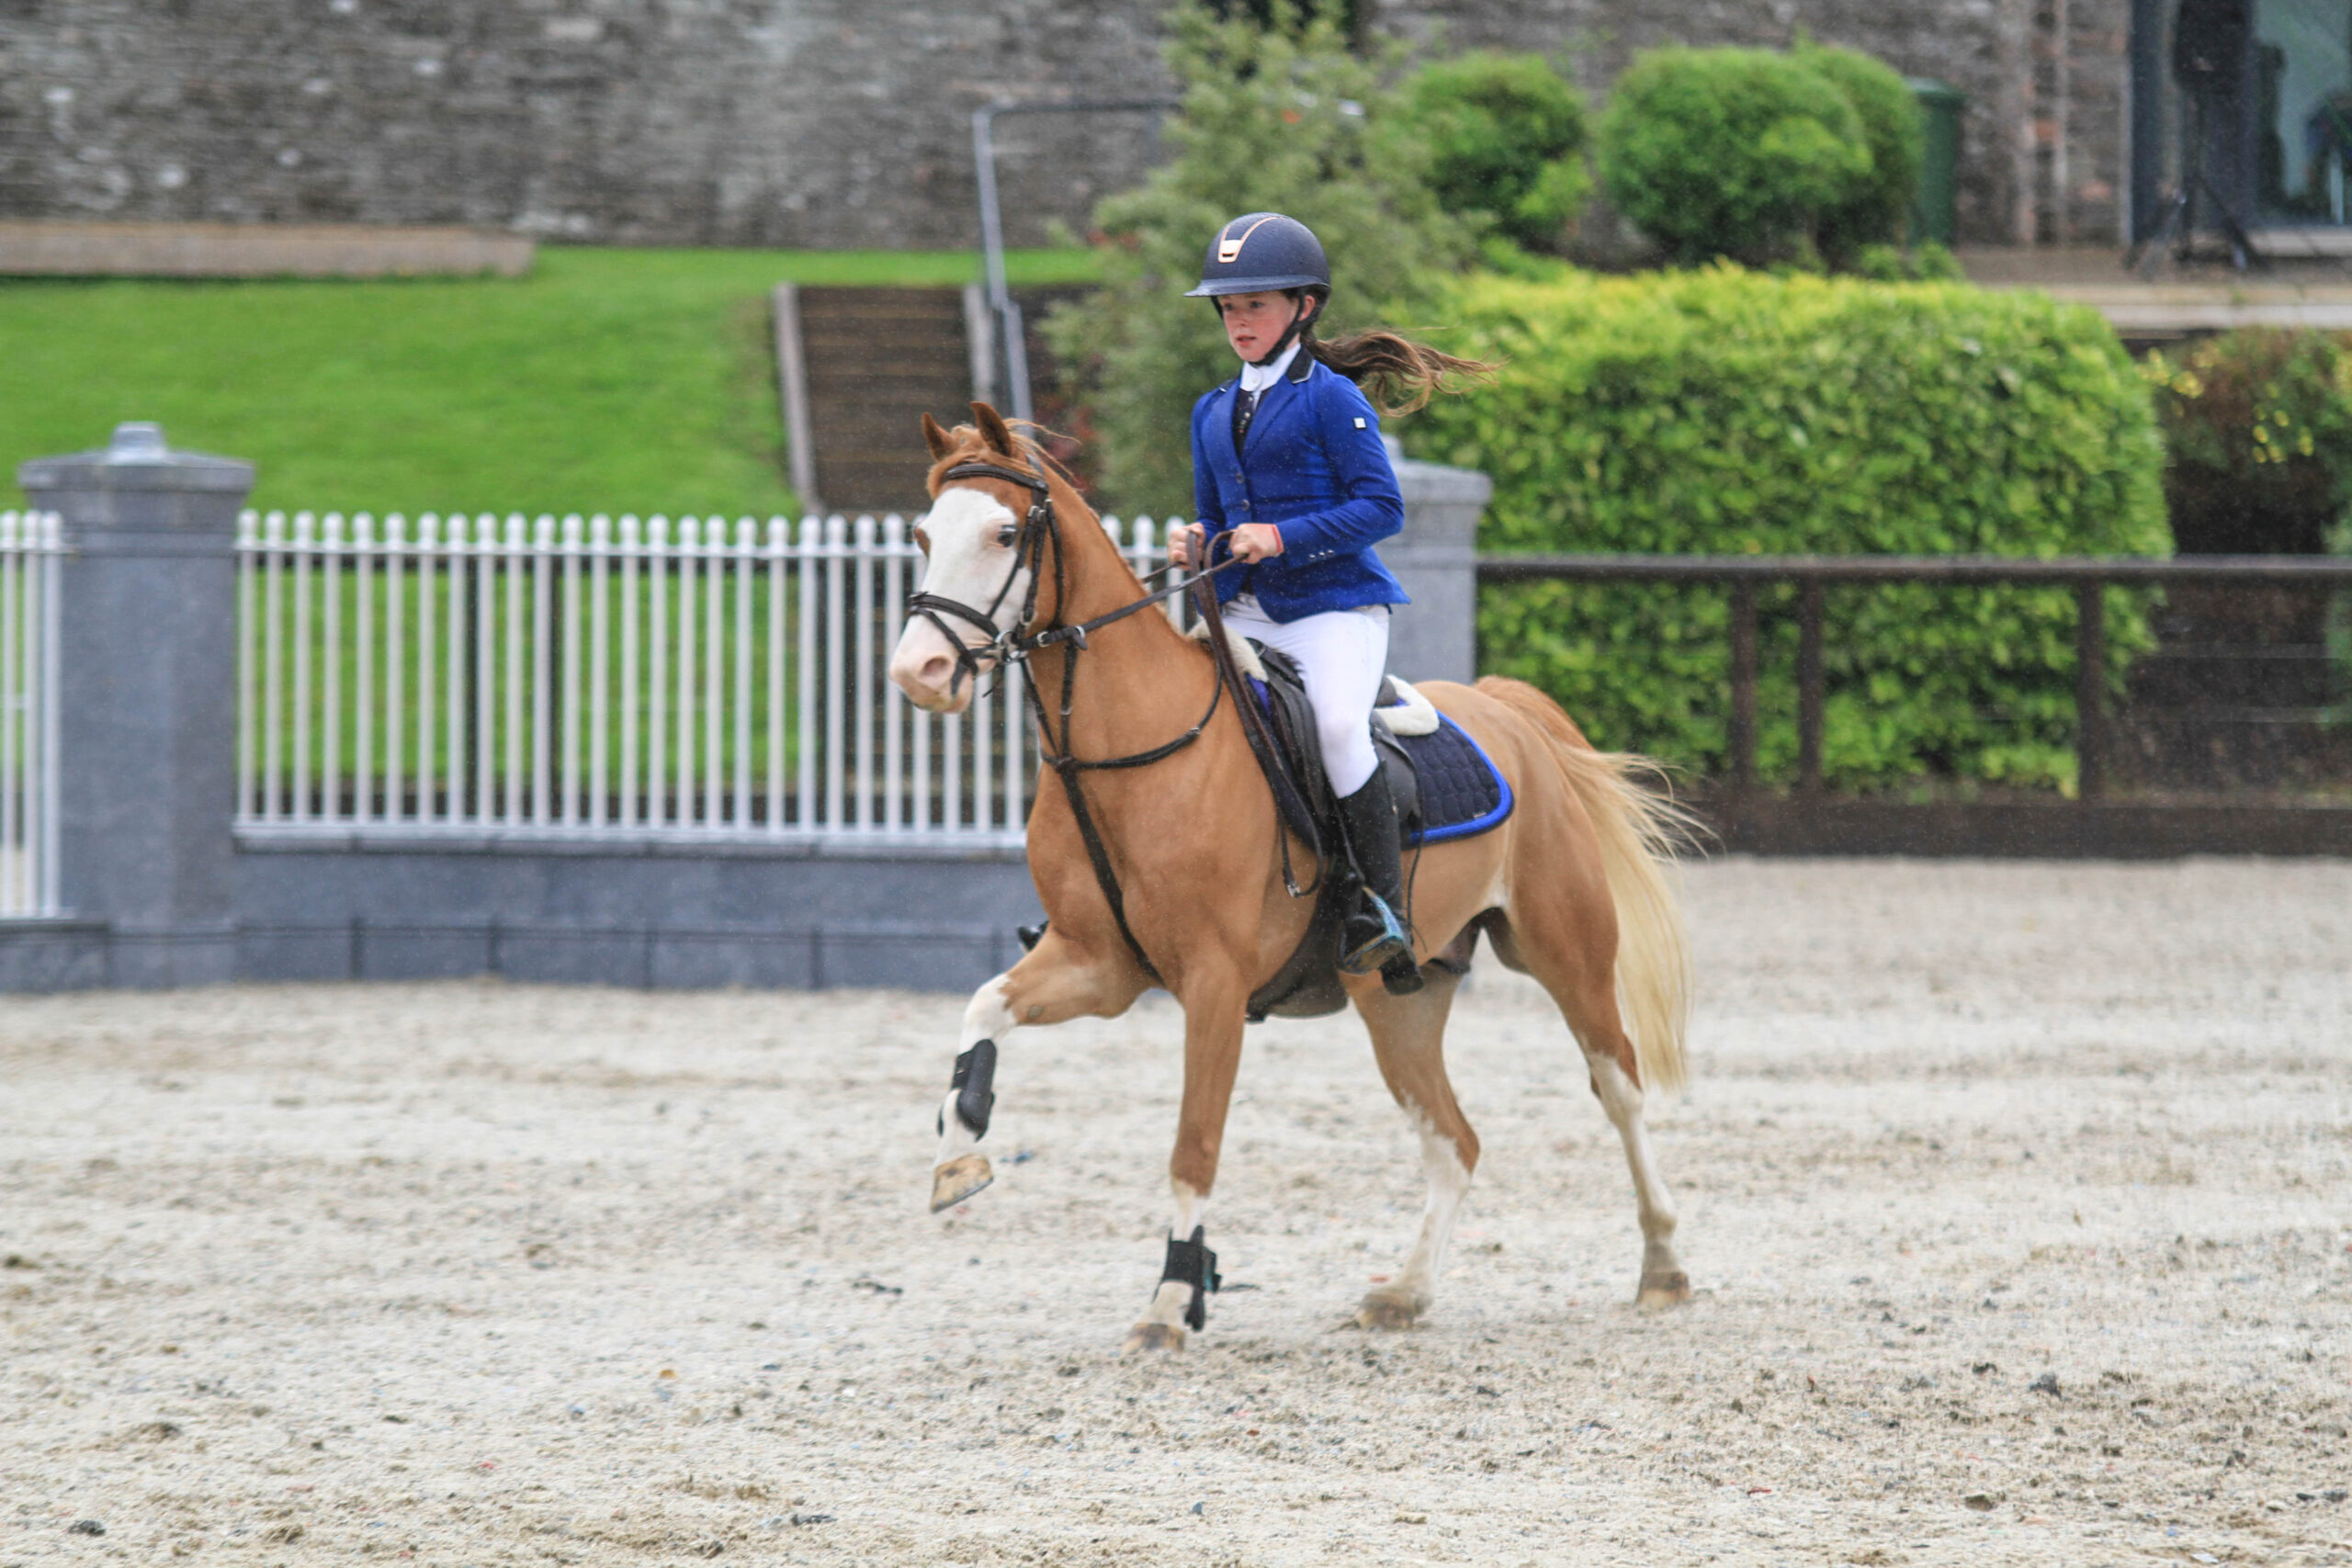 Charlotte Foley on Ghost Rider Kerveyer from Kilmacthomas, County Waterford in the 128 U10cm class sponsored by Shanakill House Equestrian Centre.